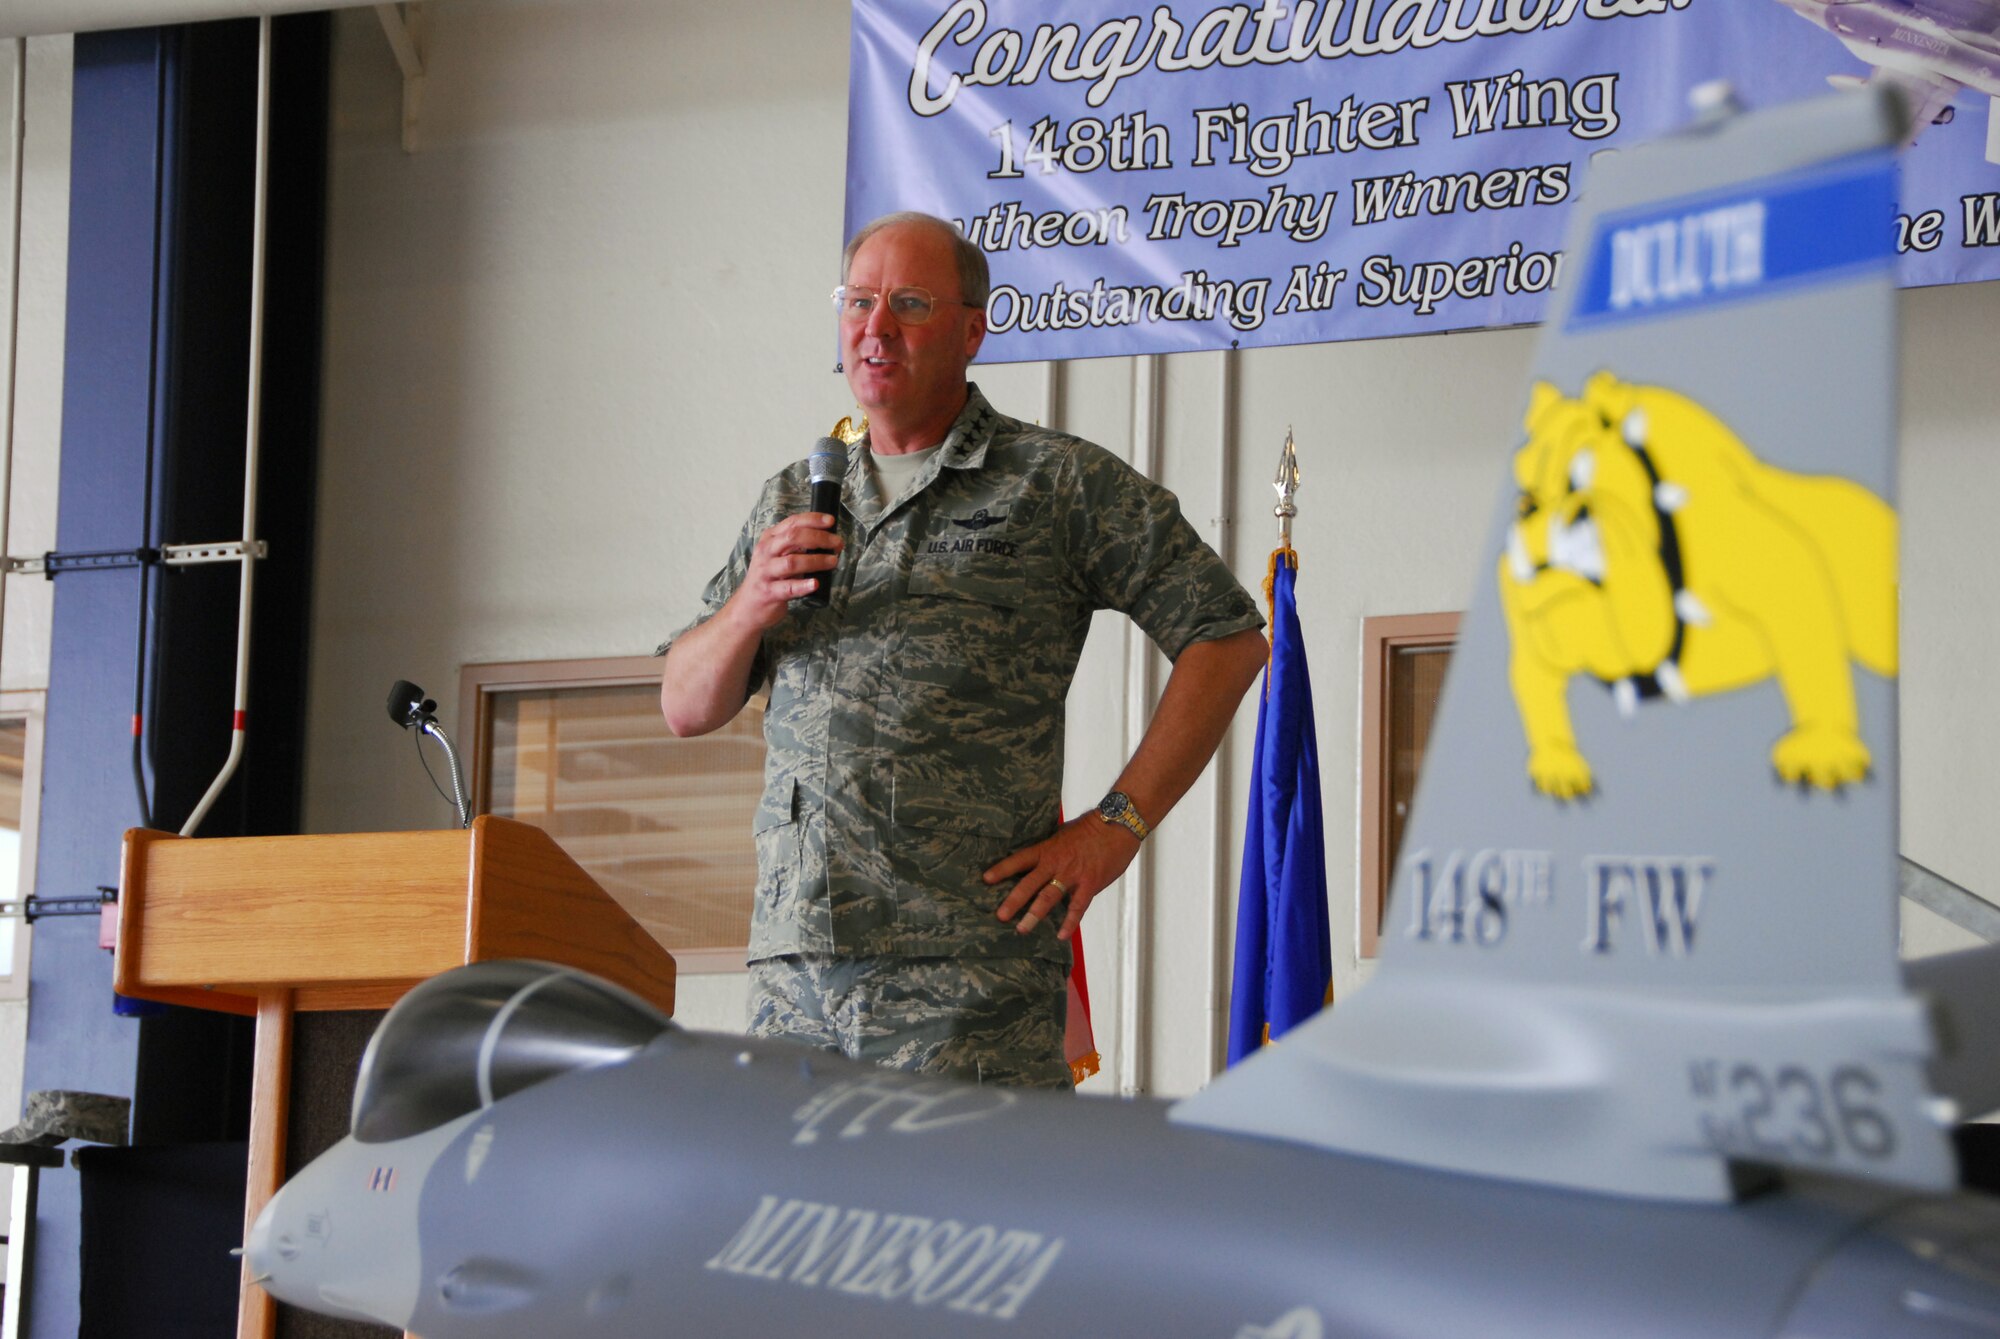 U.S. Air Force General Craig R. McKinley-Chief, National Guard Bureau, speaks to members of the 148th Fighter Wing during a celebration for receiving the Raytheon Trophy July 31, 2009 in Duluth, Minn.  The Raytheon Trophy was awarded to the 179th Fighter Squadron of the 148th Fighter Wing as the most outstanding air defense unit in the U.S. Air Force, marking only the fourth time an Air National Guard unit received this award since its inception in 1953.  (U.S. Air Force photo by Tech. Sgt. Brett R. Ewald)